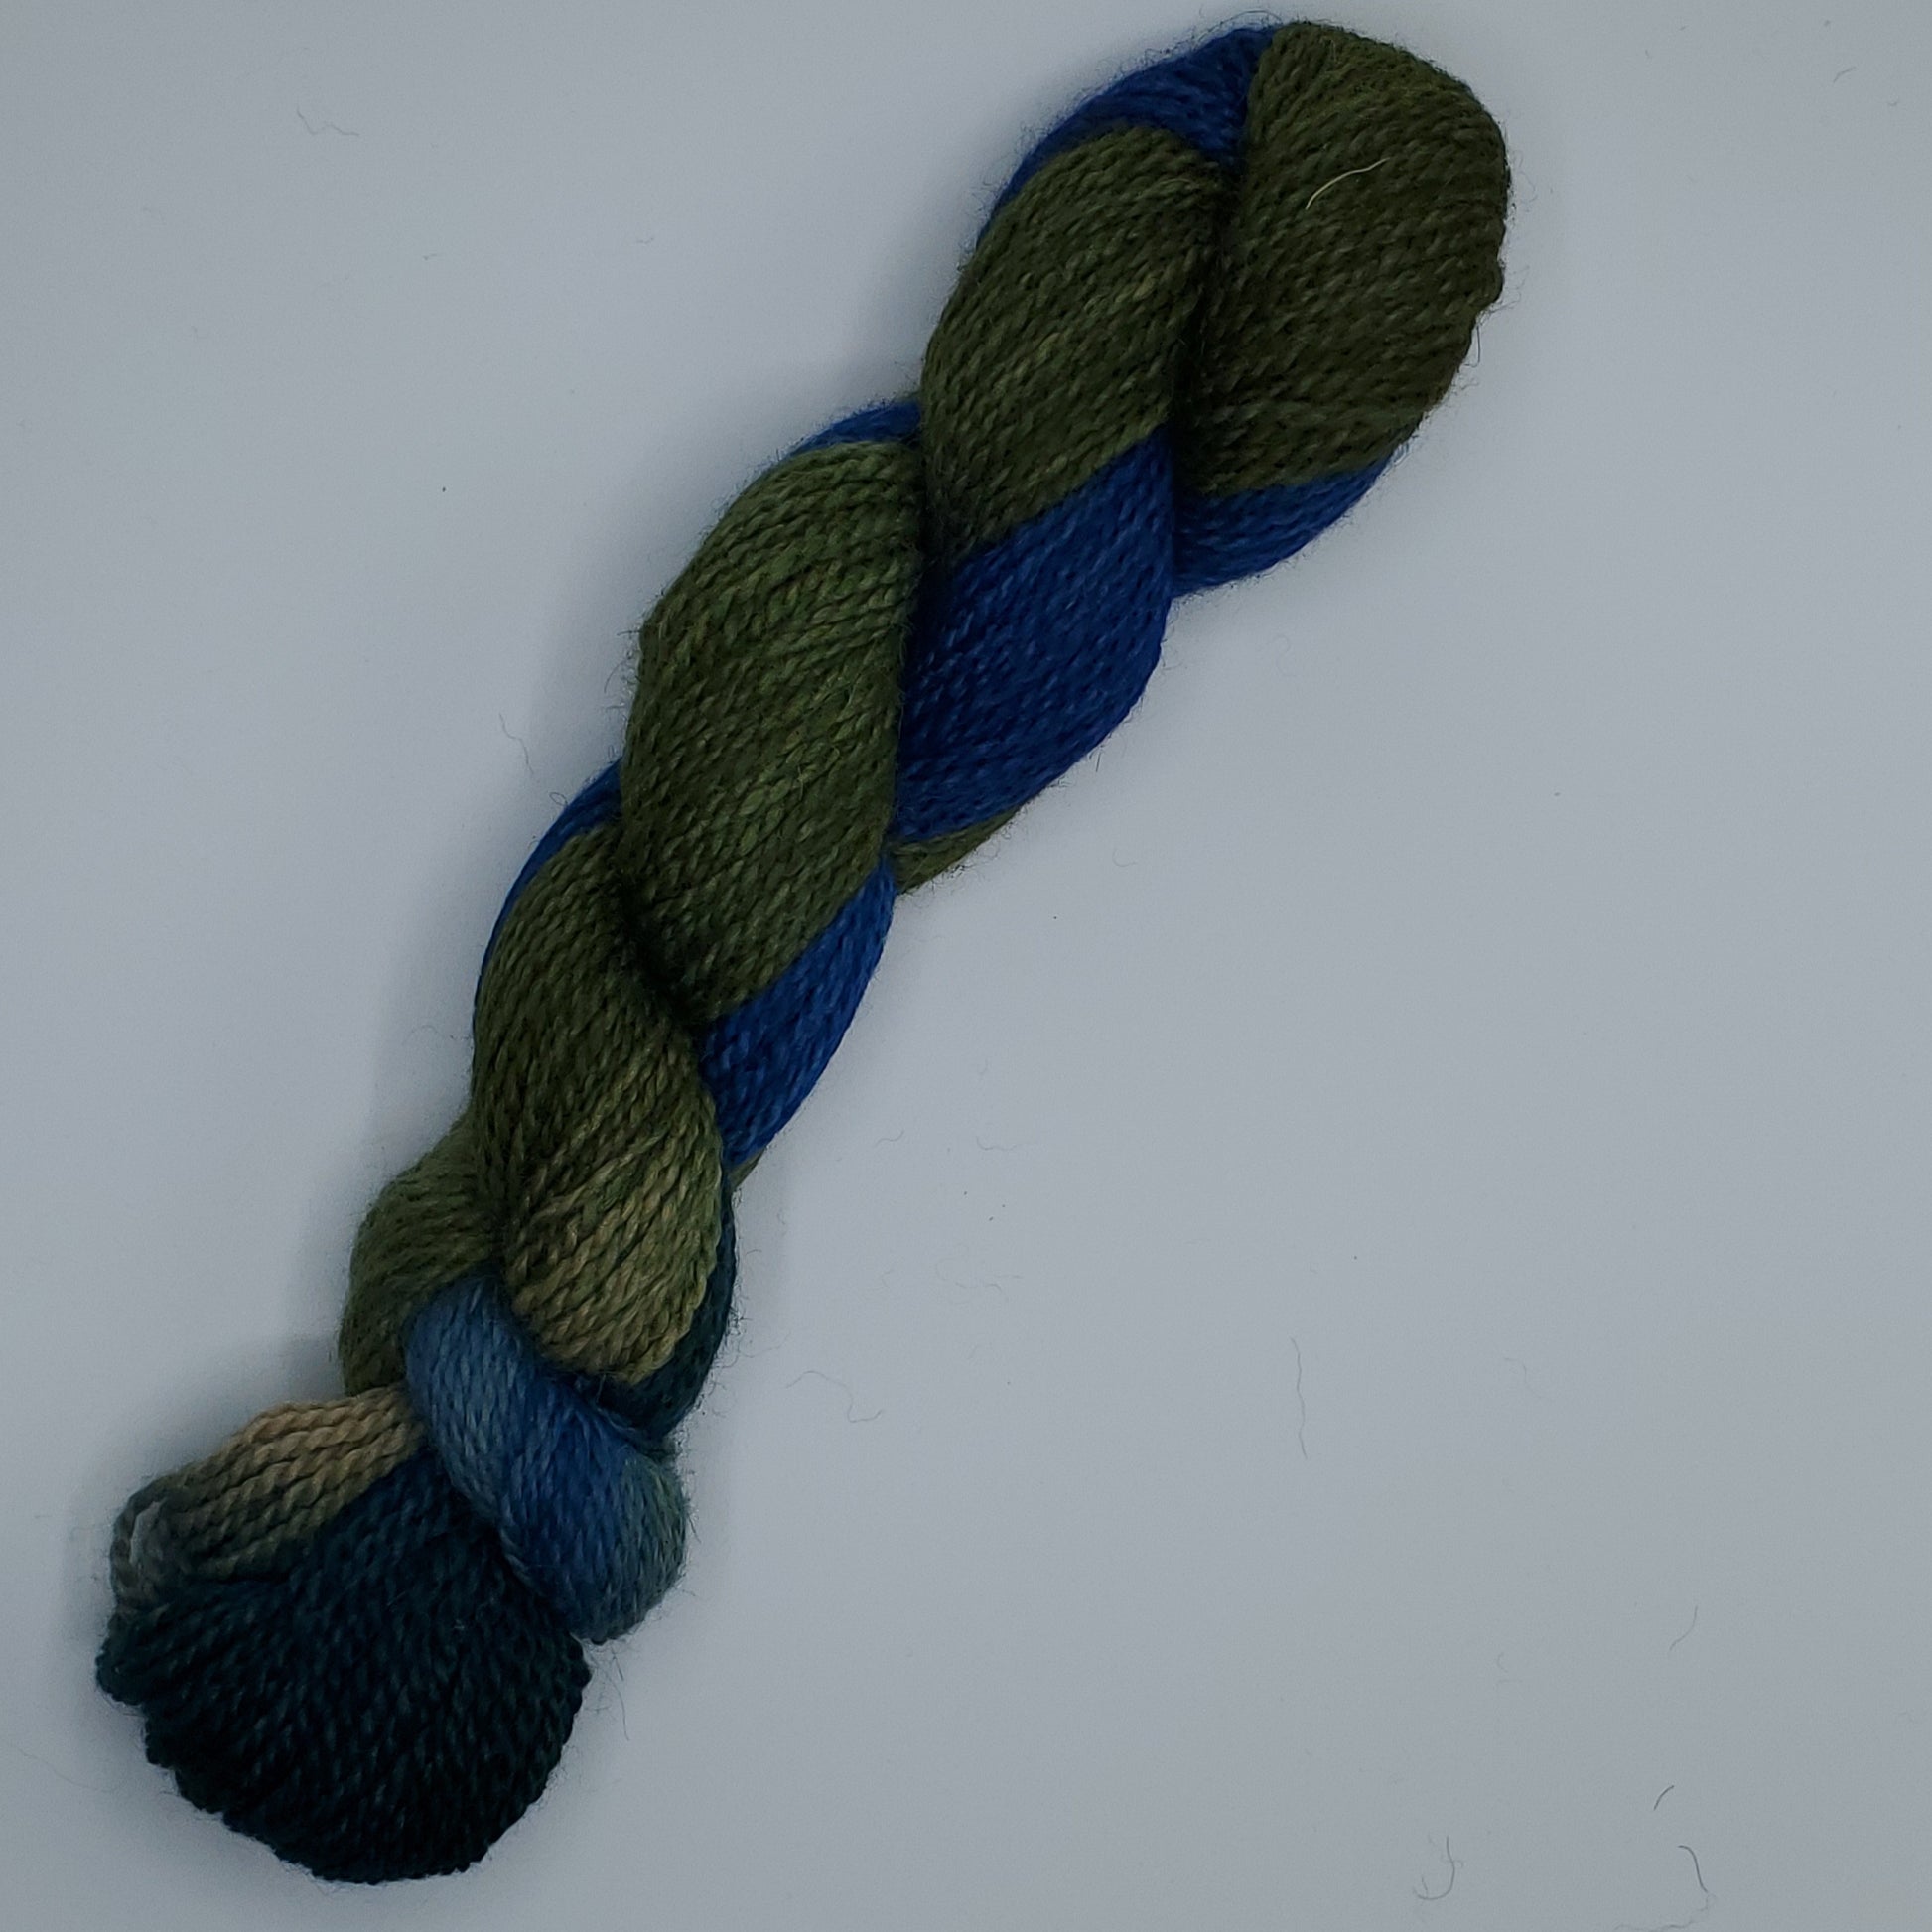 DK Knitter's Yarn blue and green